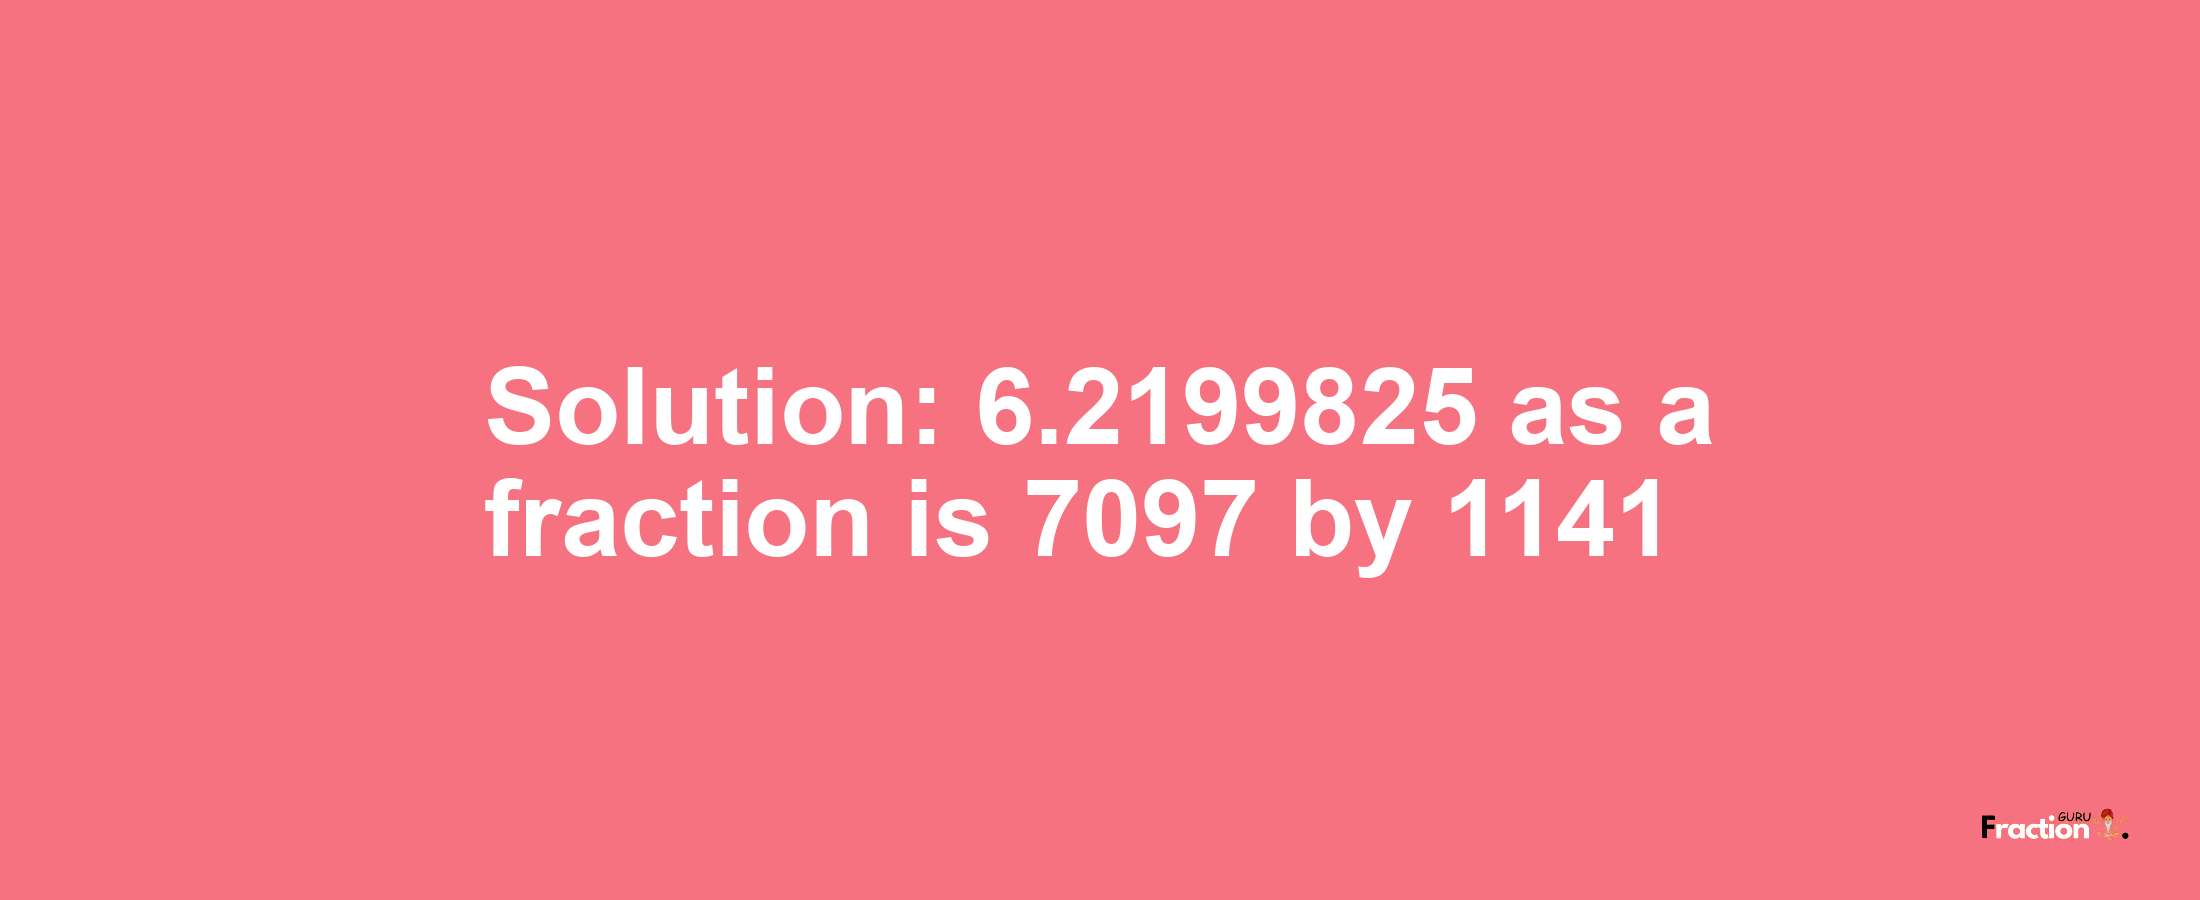 Solution:6.2199825 as a fraction is 7097/1141